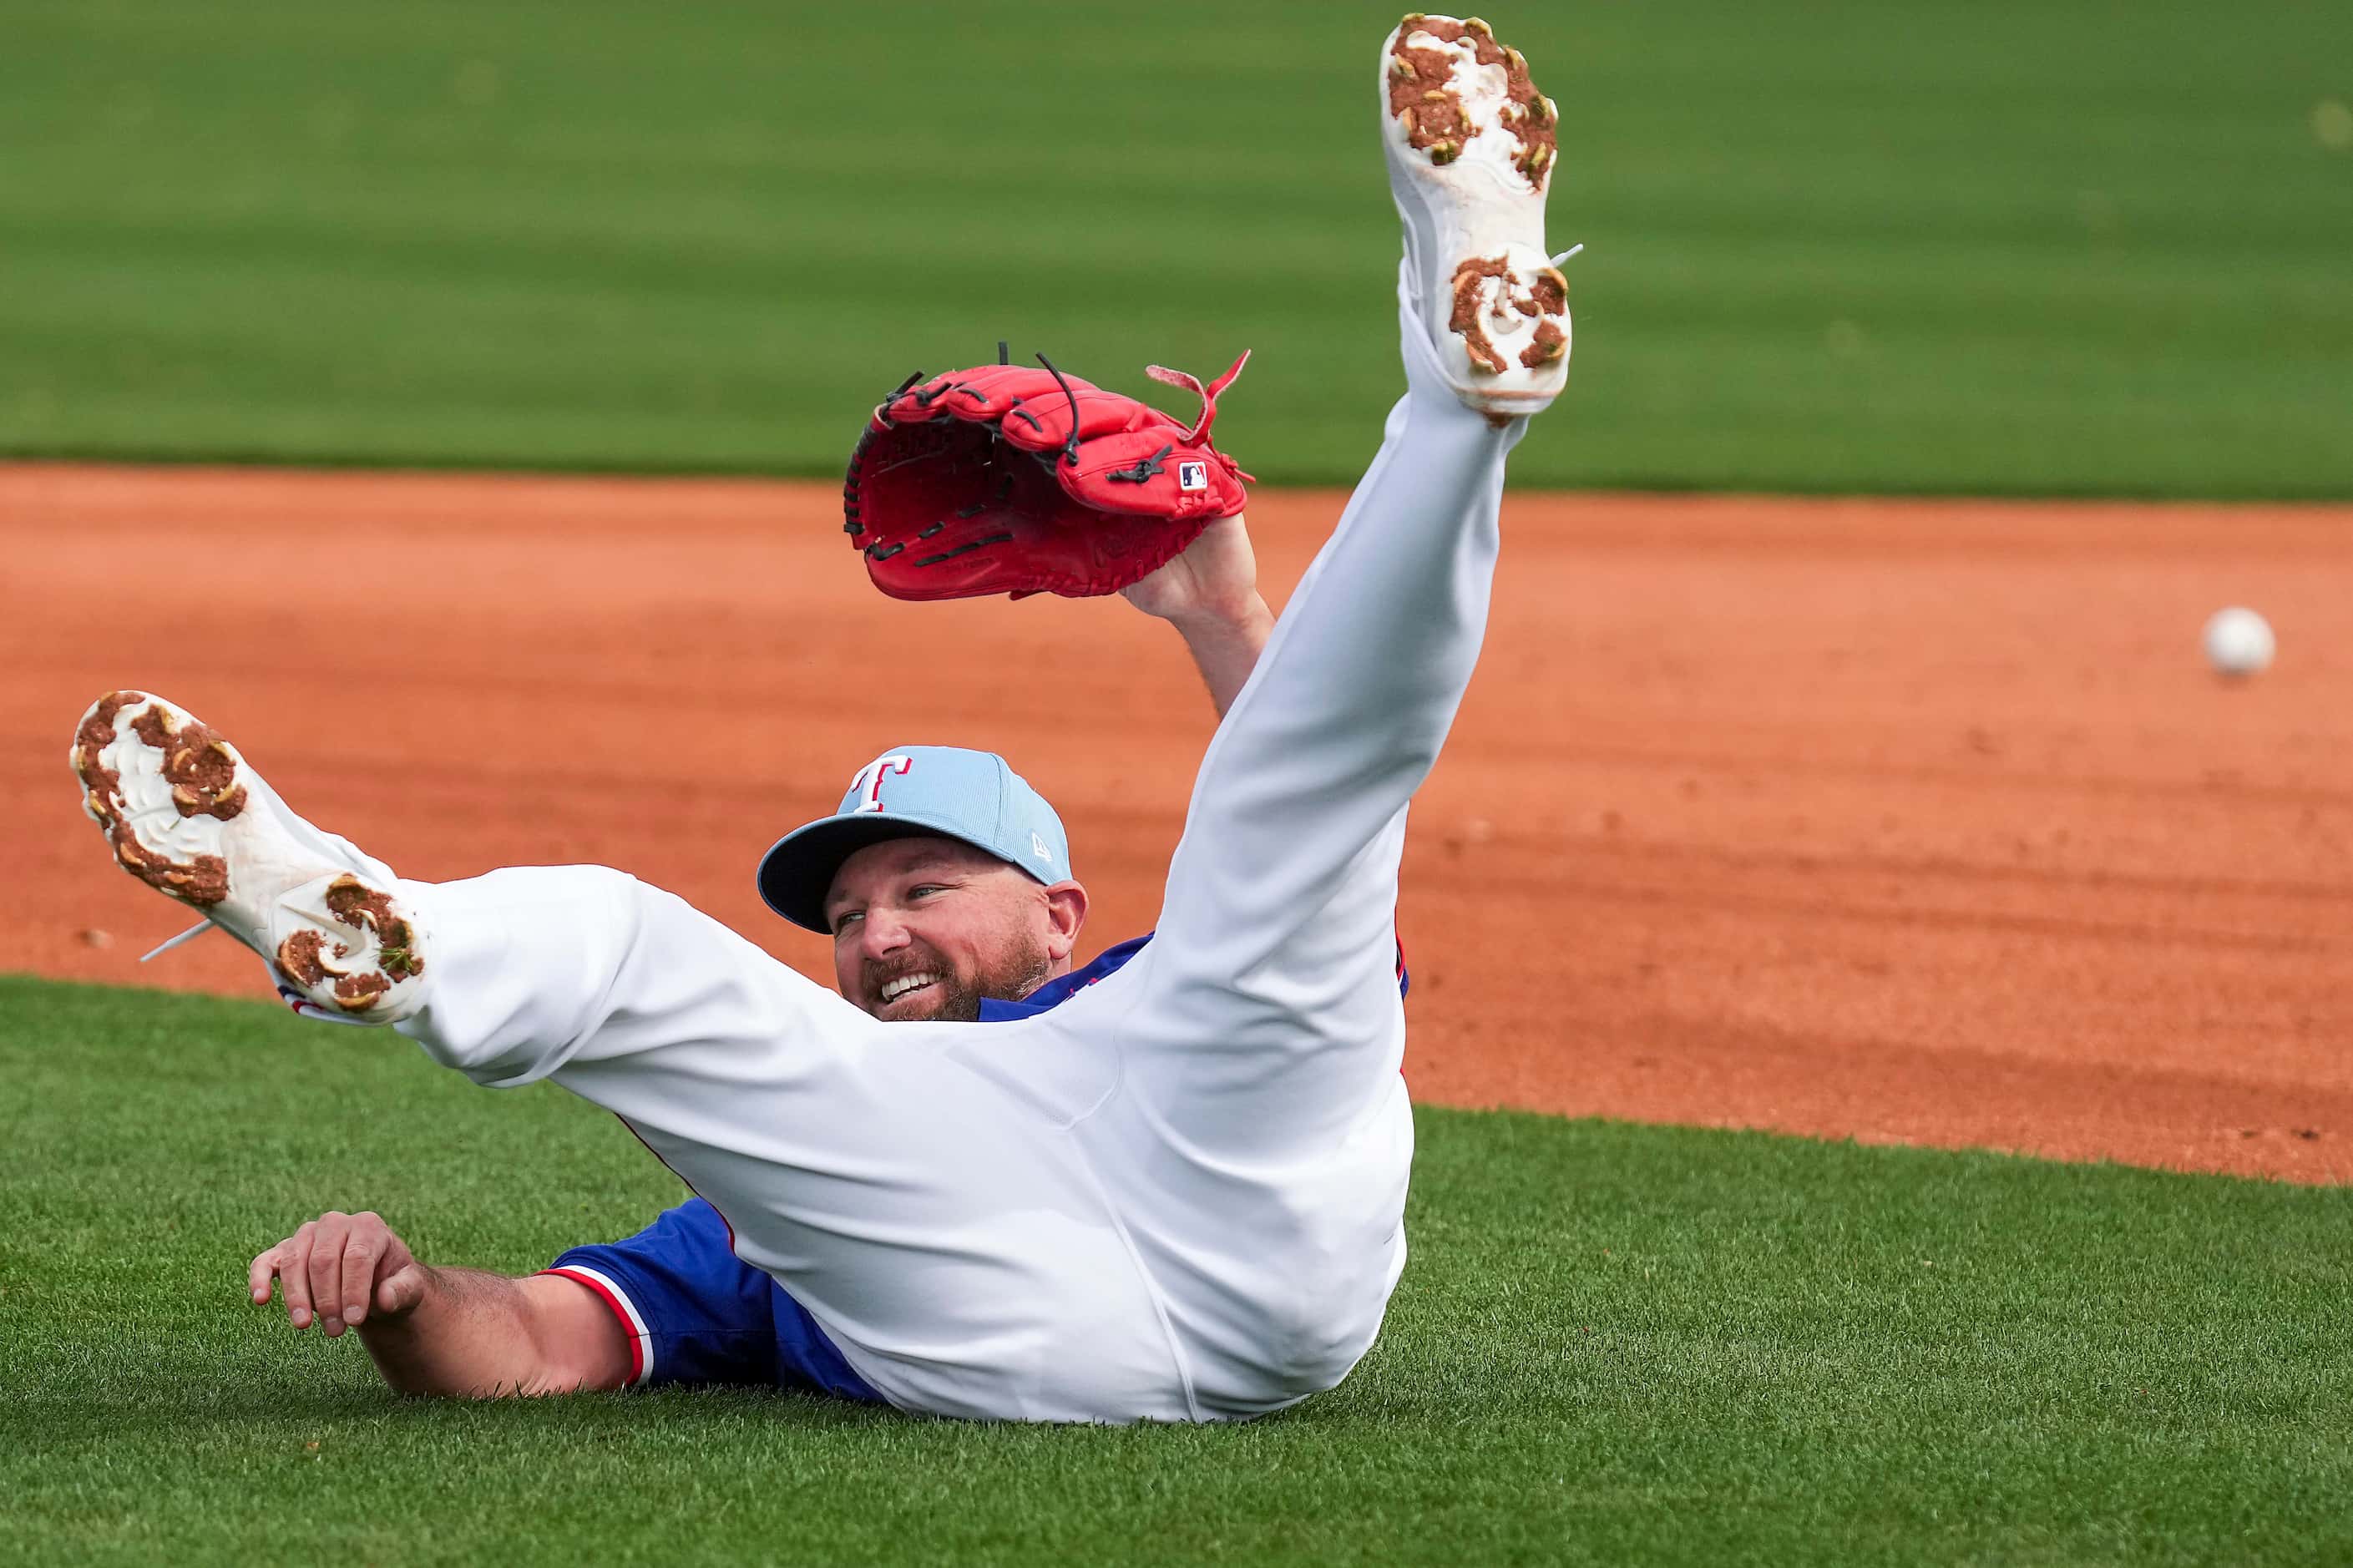 Texas Rangers pitcher Kirby Yates tumbles after diving for a popup in a fielding drill...